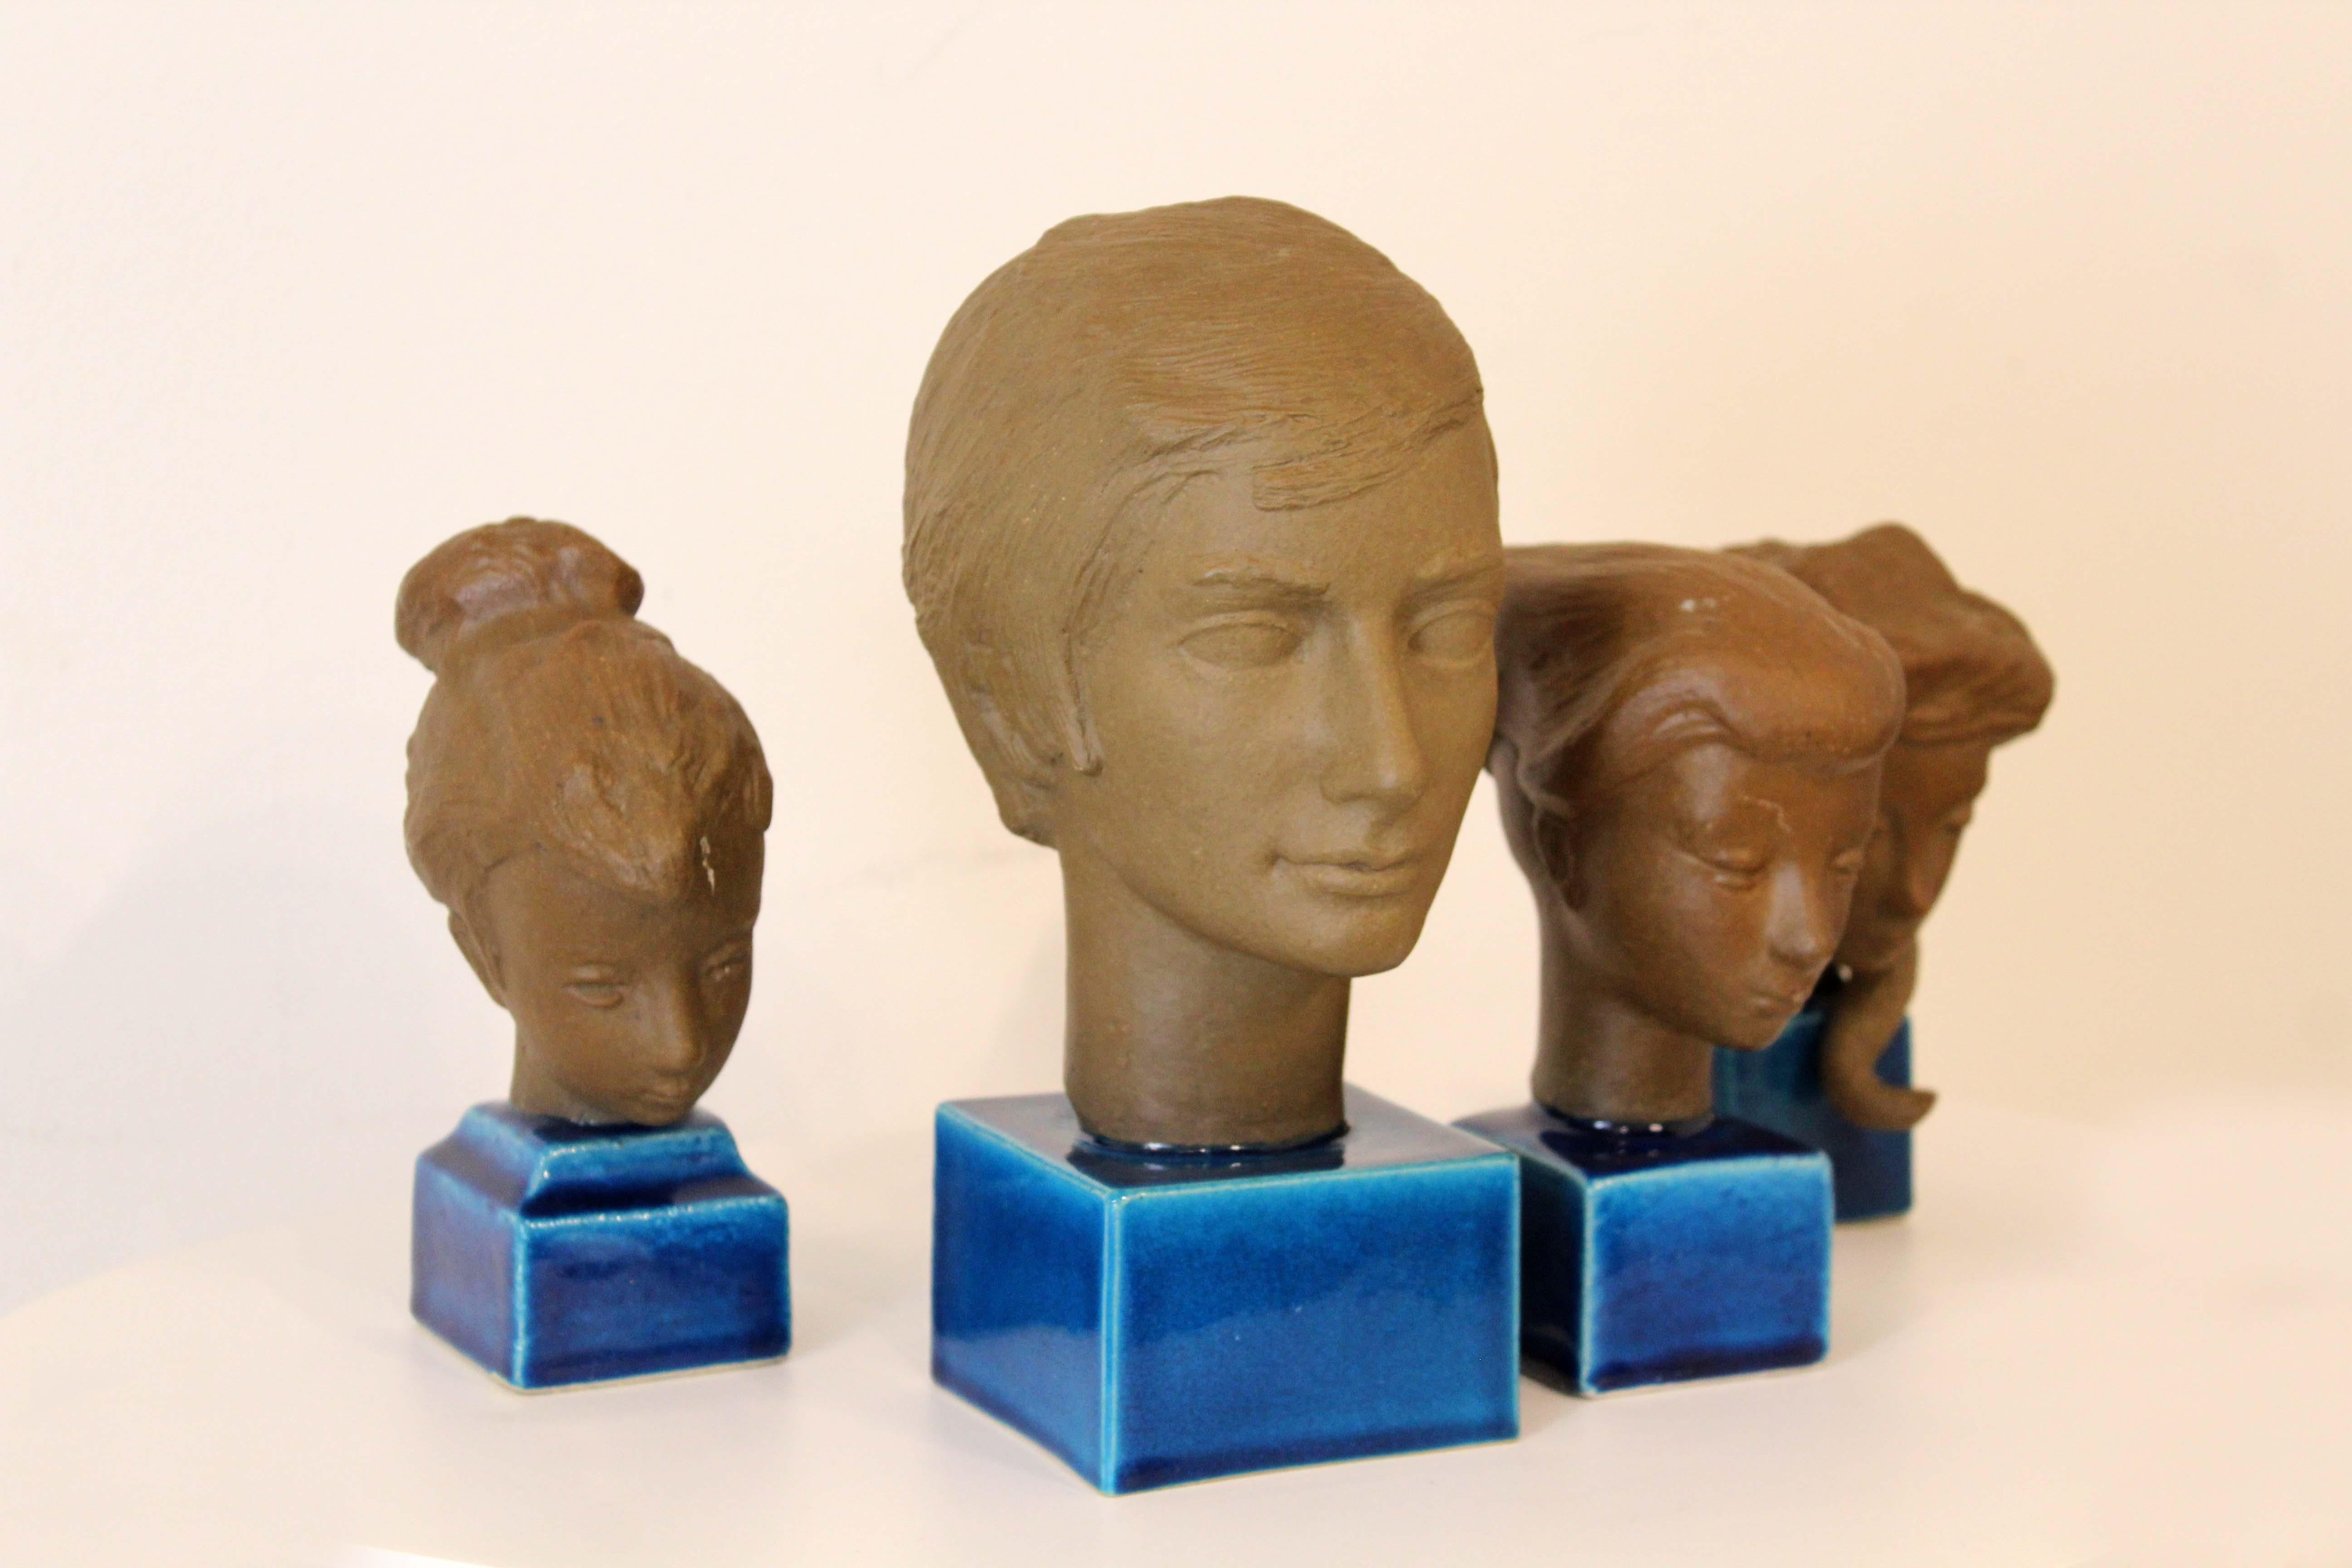 An interesting set of 4 modern inspired hand-crafted ceramic busts by Johannes Hedegaard for Royal Copenhagen Denmark. Each sculpture is marked on the bottom with Hedegaard’s signature with a inventory number. Dimensions: 8.5 x 4w x 5.75w / 5.5h x